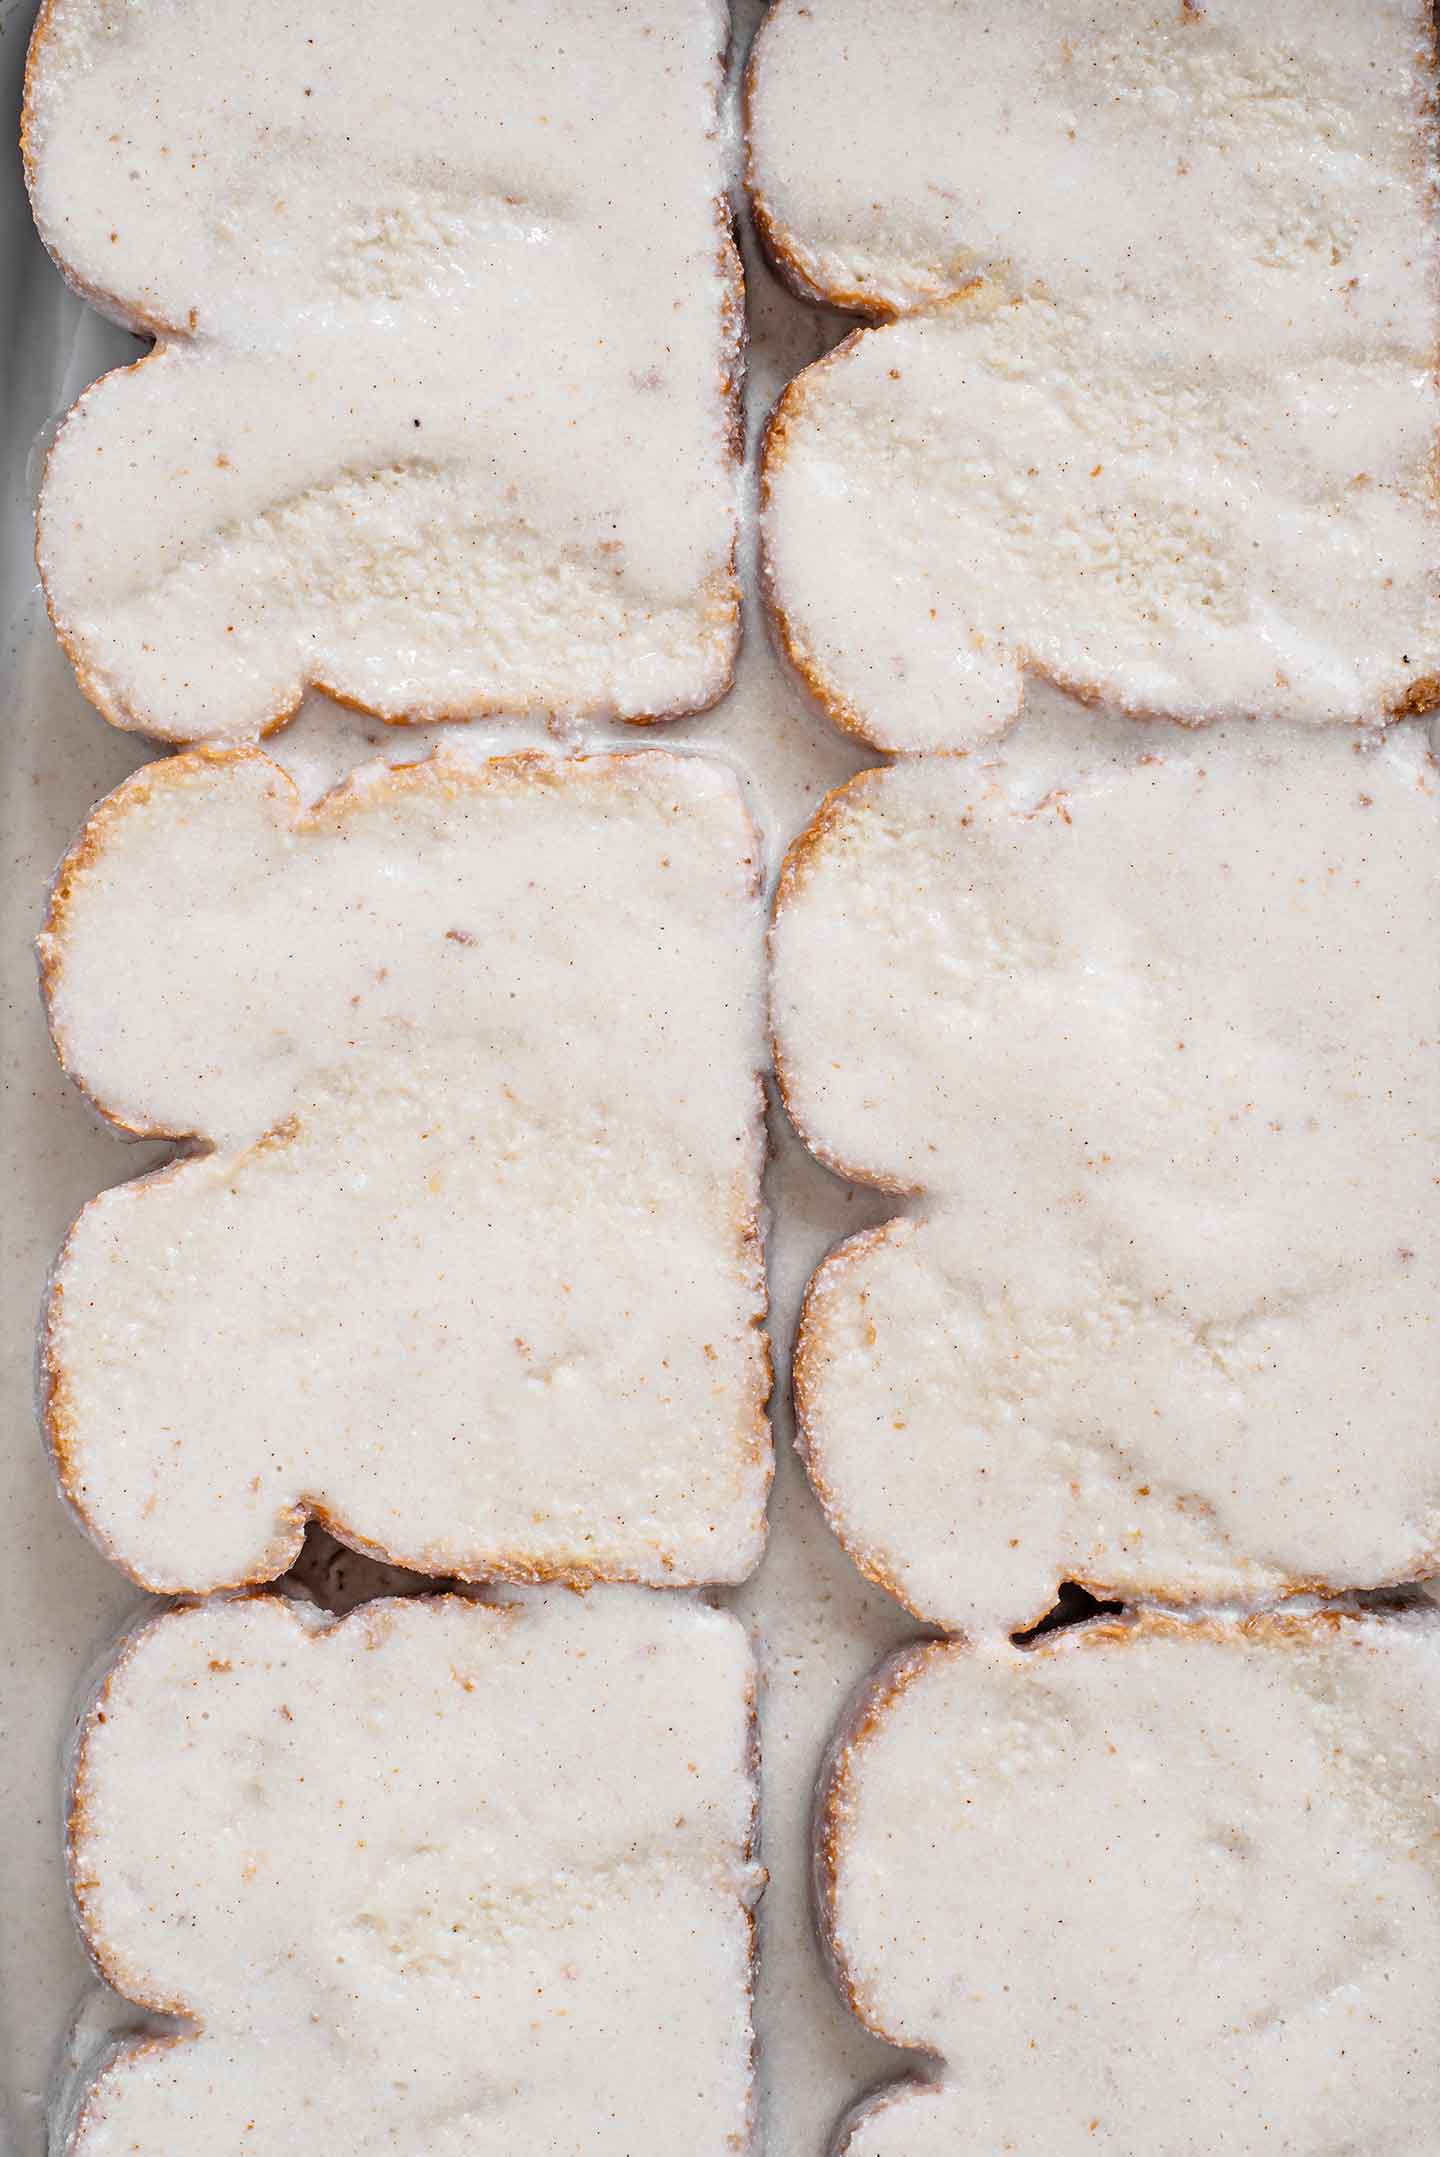 Top down view of slices of bread coated in a white custard evenly displayed in a ceramic casserole dish.